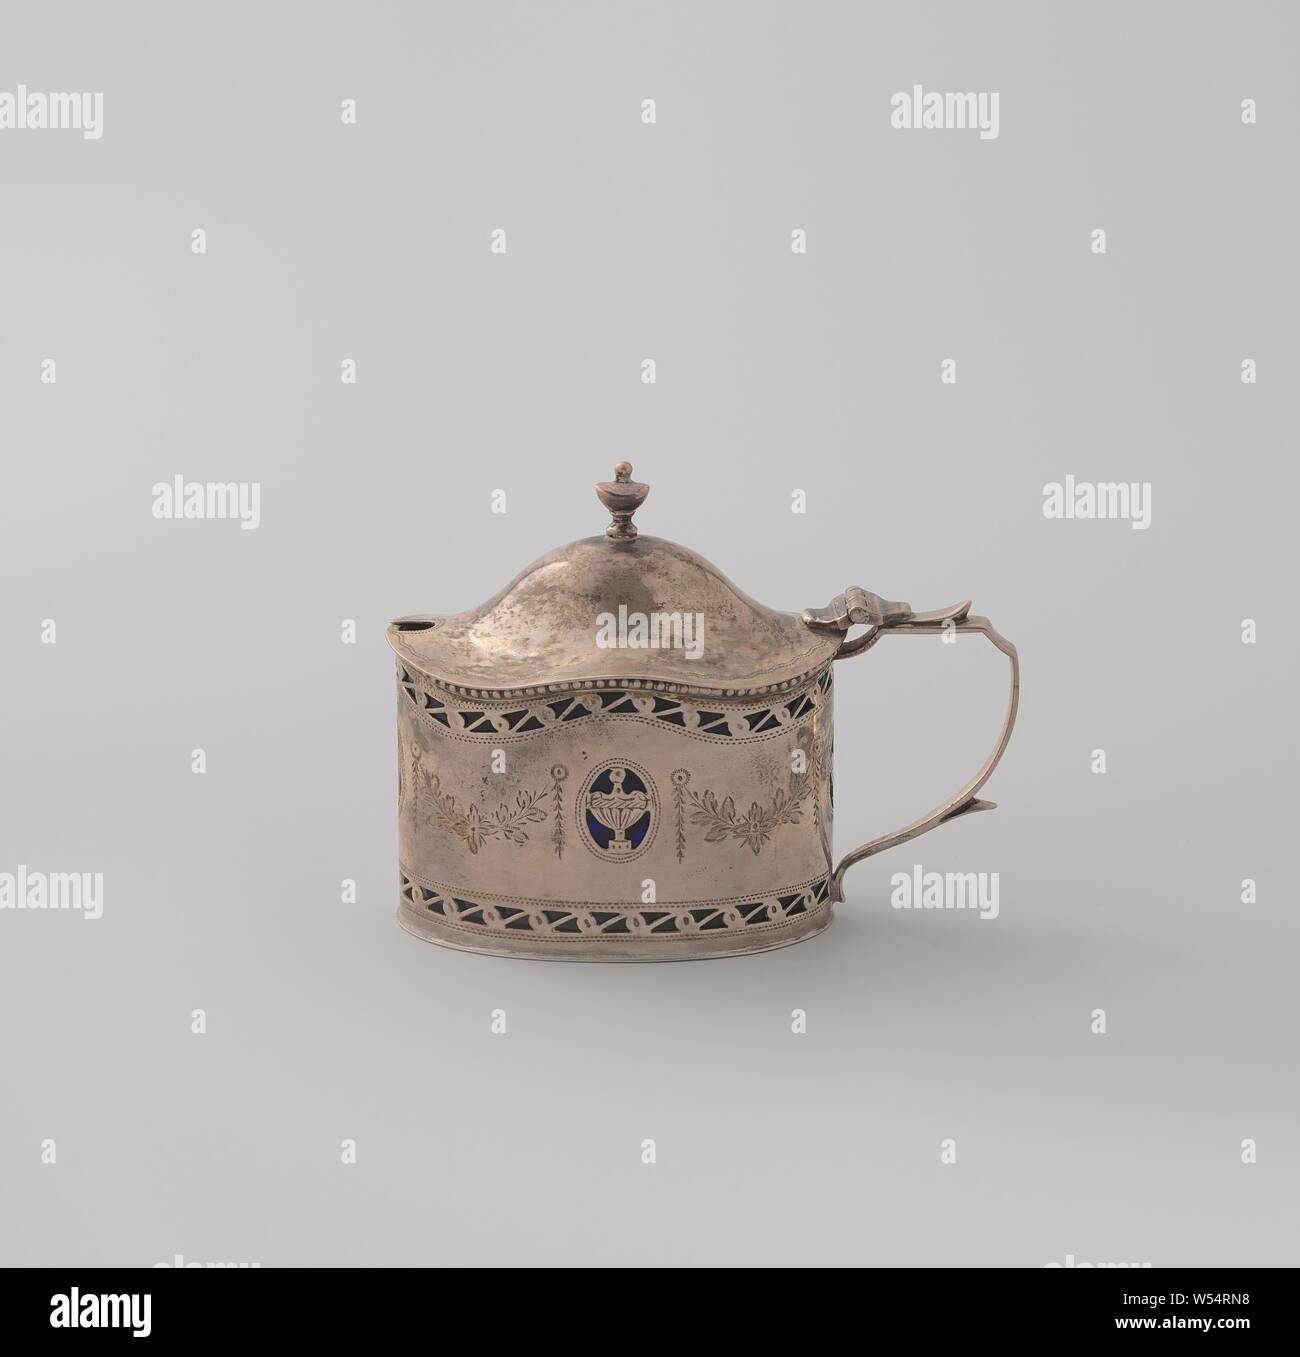 Mustard pot, Oval mustard pot of silver, in Louis XVI style. With a corrugated top edge and a curved lid. An openwork edge along the top and bottom., anonymous, London, 1908 - 1909, silver (metal), binnenpot, h 8.0 cm × l 8.0 cm × w 5.3 cm Stock Photo